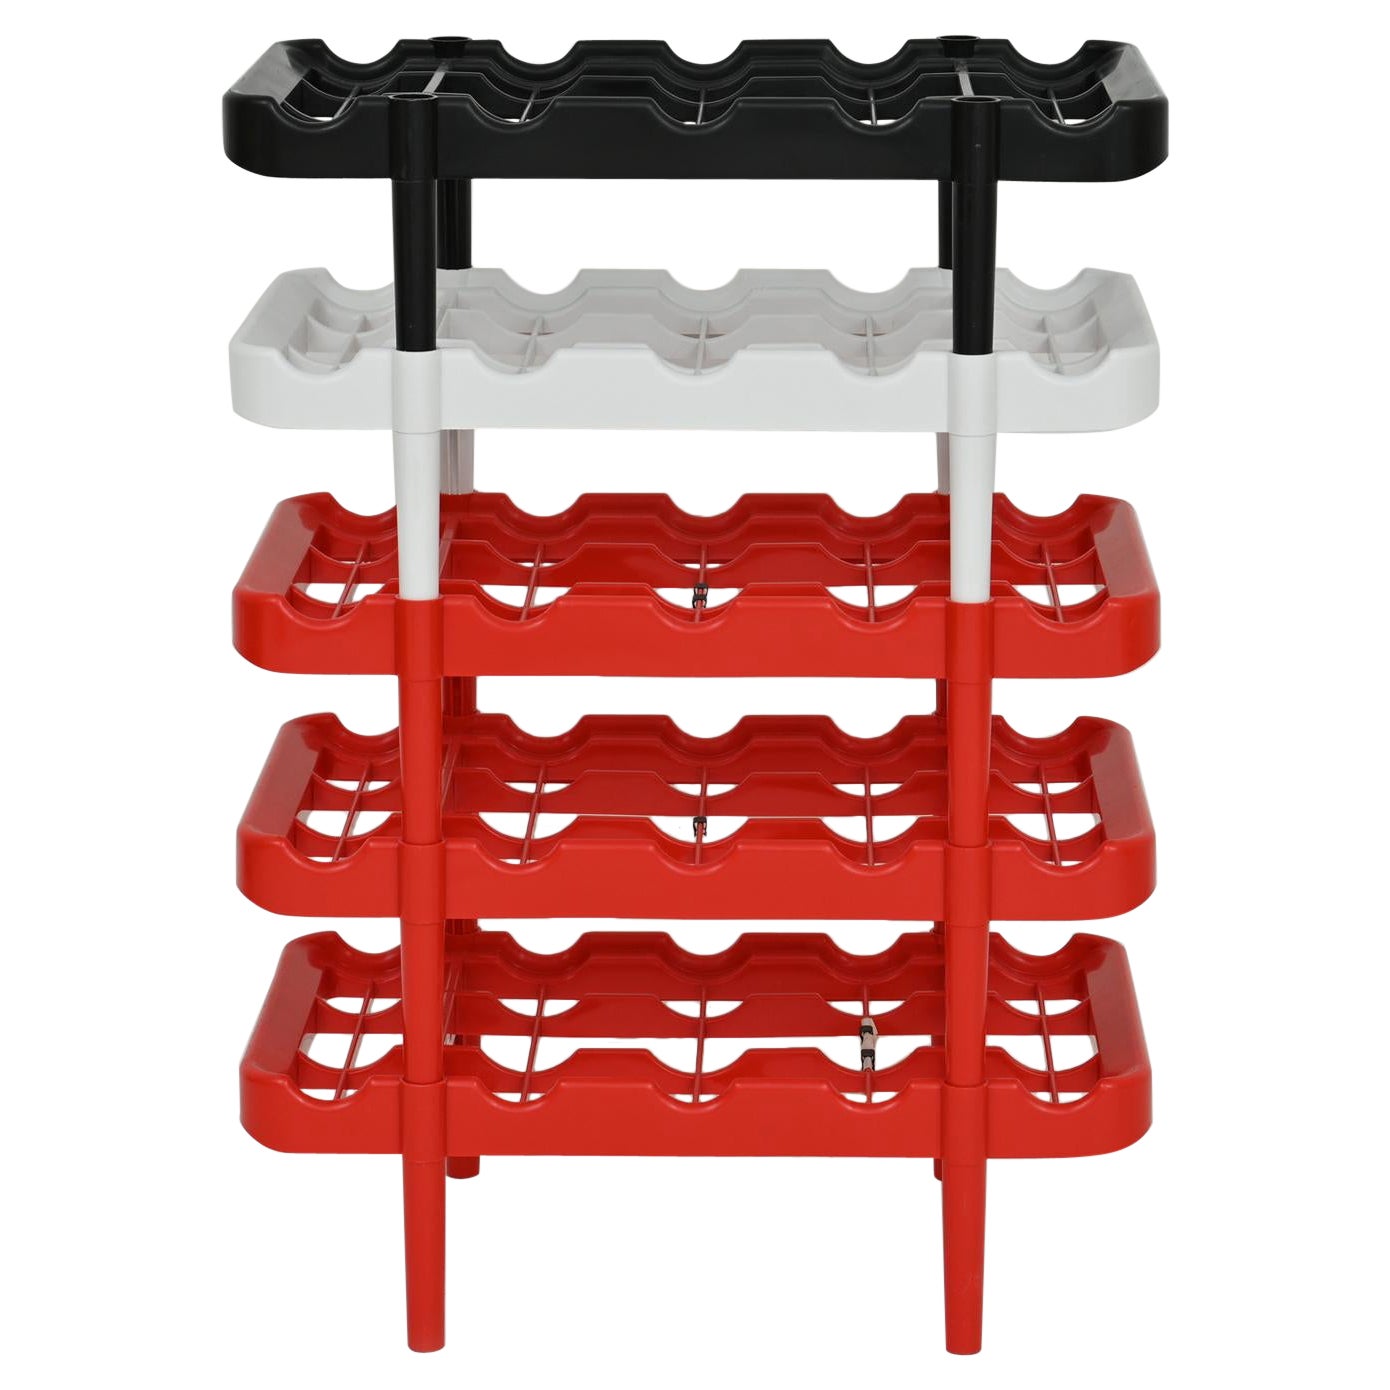 1970s Modular Stacking Red-Black-White Colorway Wine Rack by Kartell For Sale